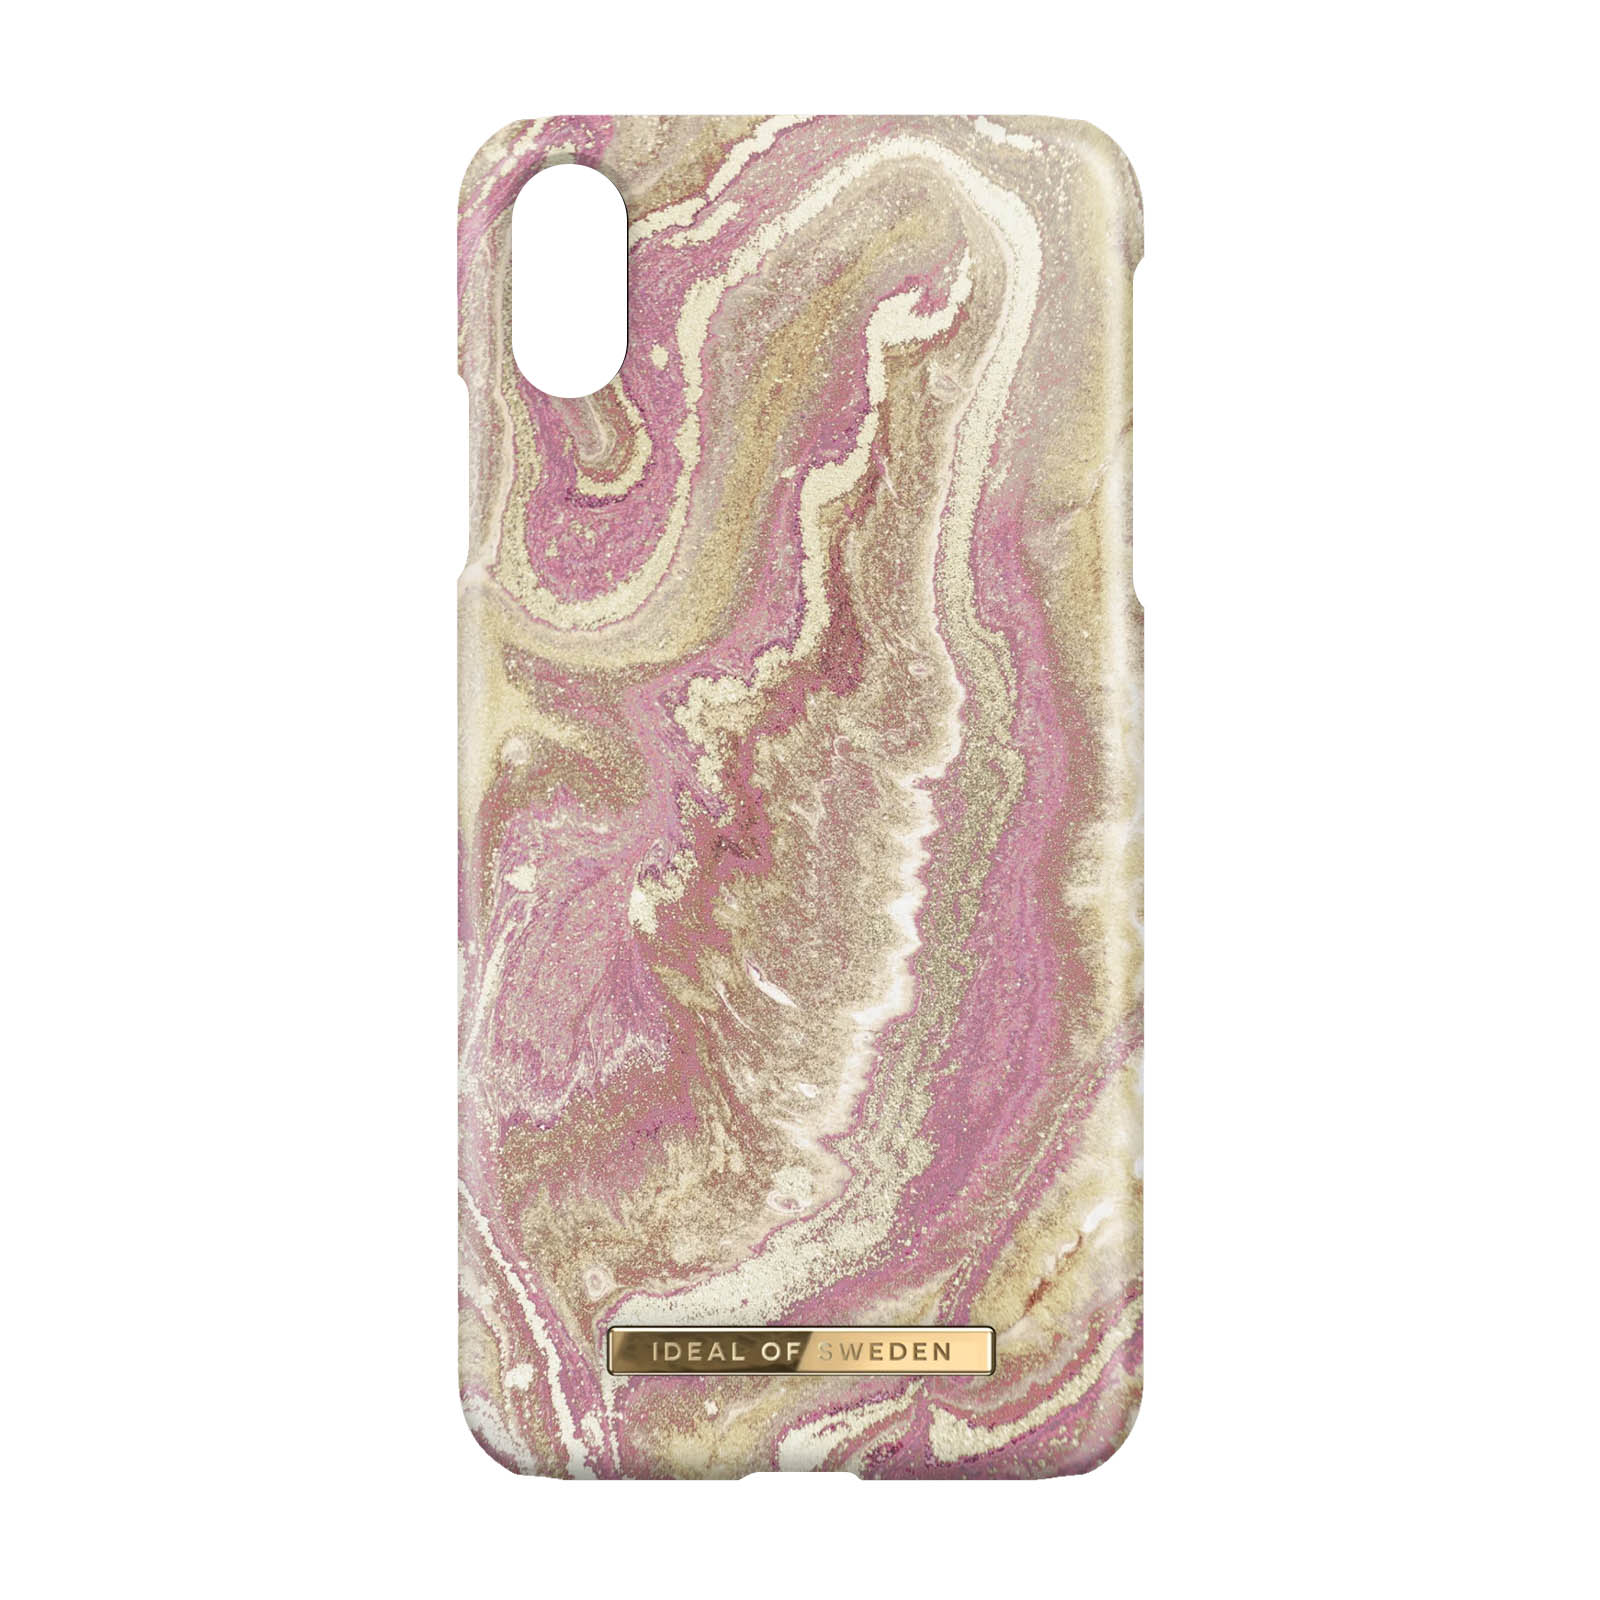 Series, Backcover, Hülle OF IDEAL Apple, Rosa Max, Golden Marble XS iPhone SWEDEN Blush